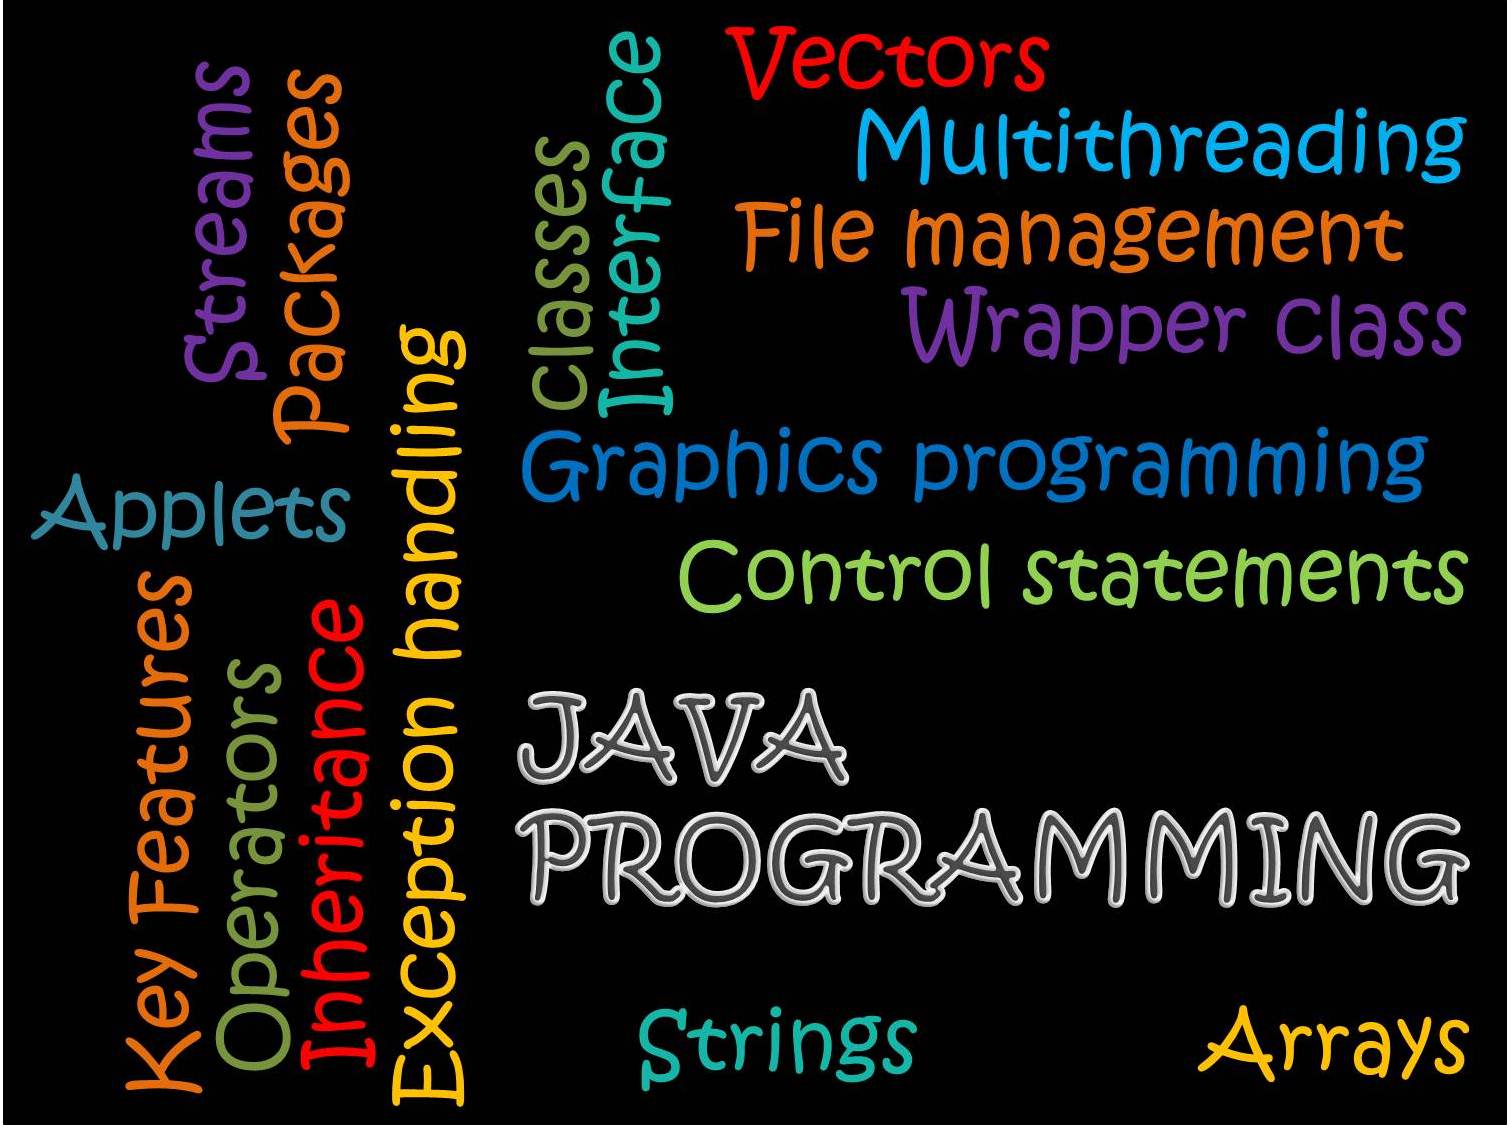 http://study.aisectonline.com/images/Programming with Java.jpg